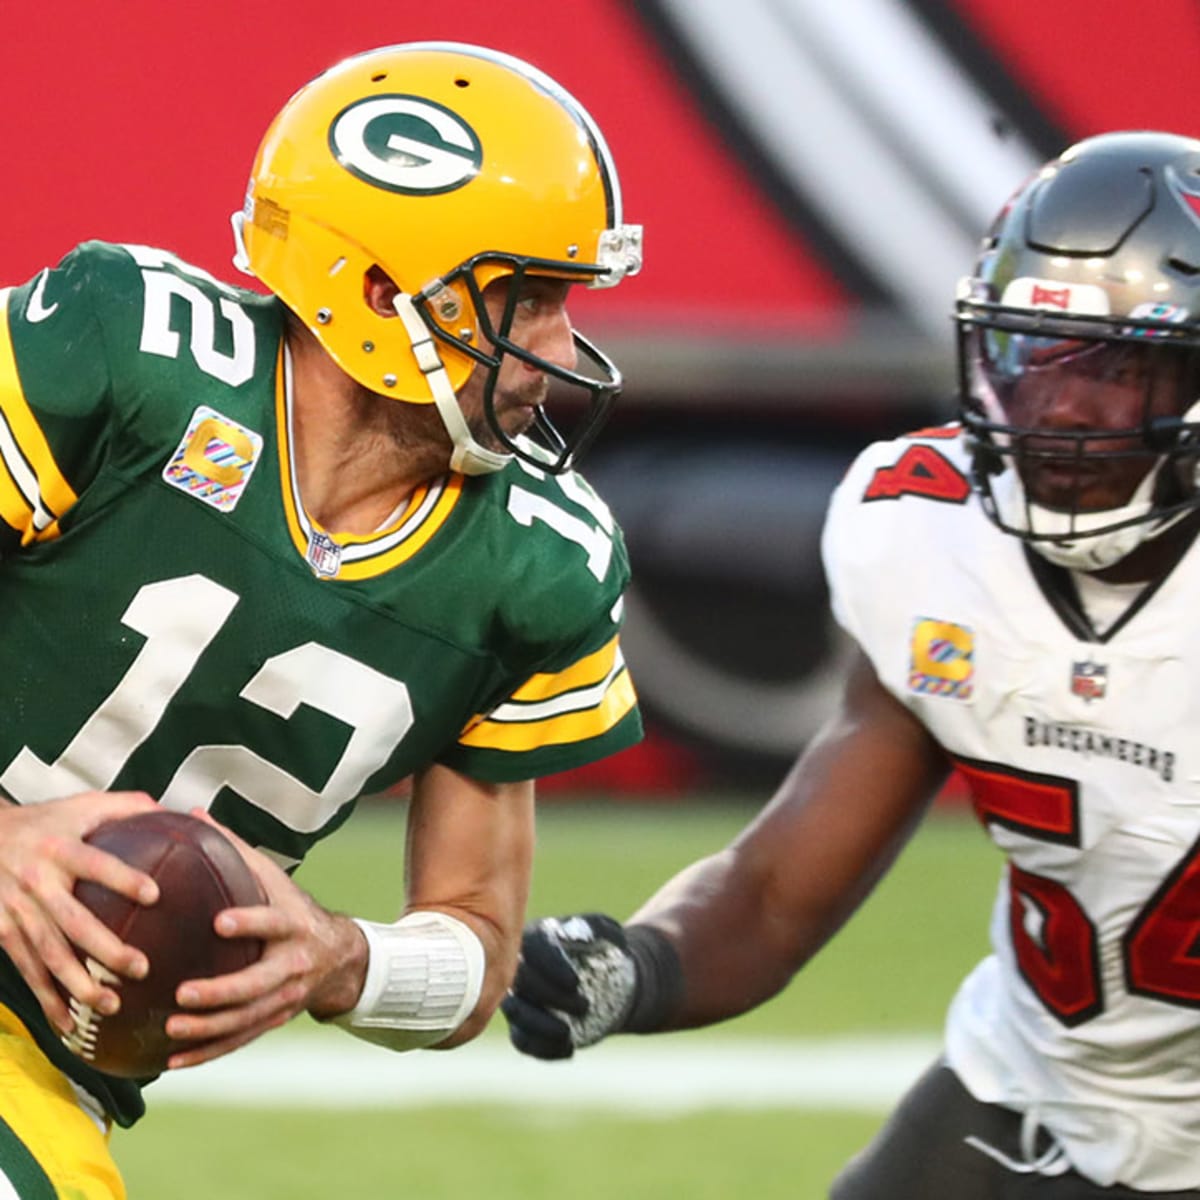 How to stream, watch Packers-Bucs NFC Championship Game on TV